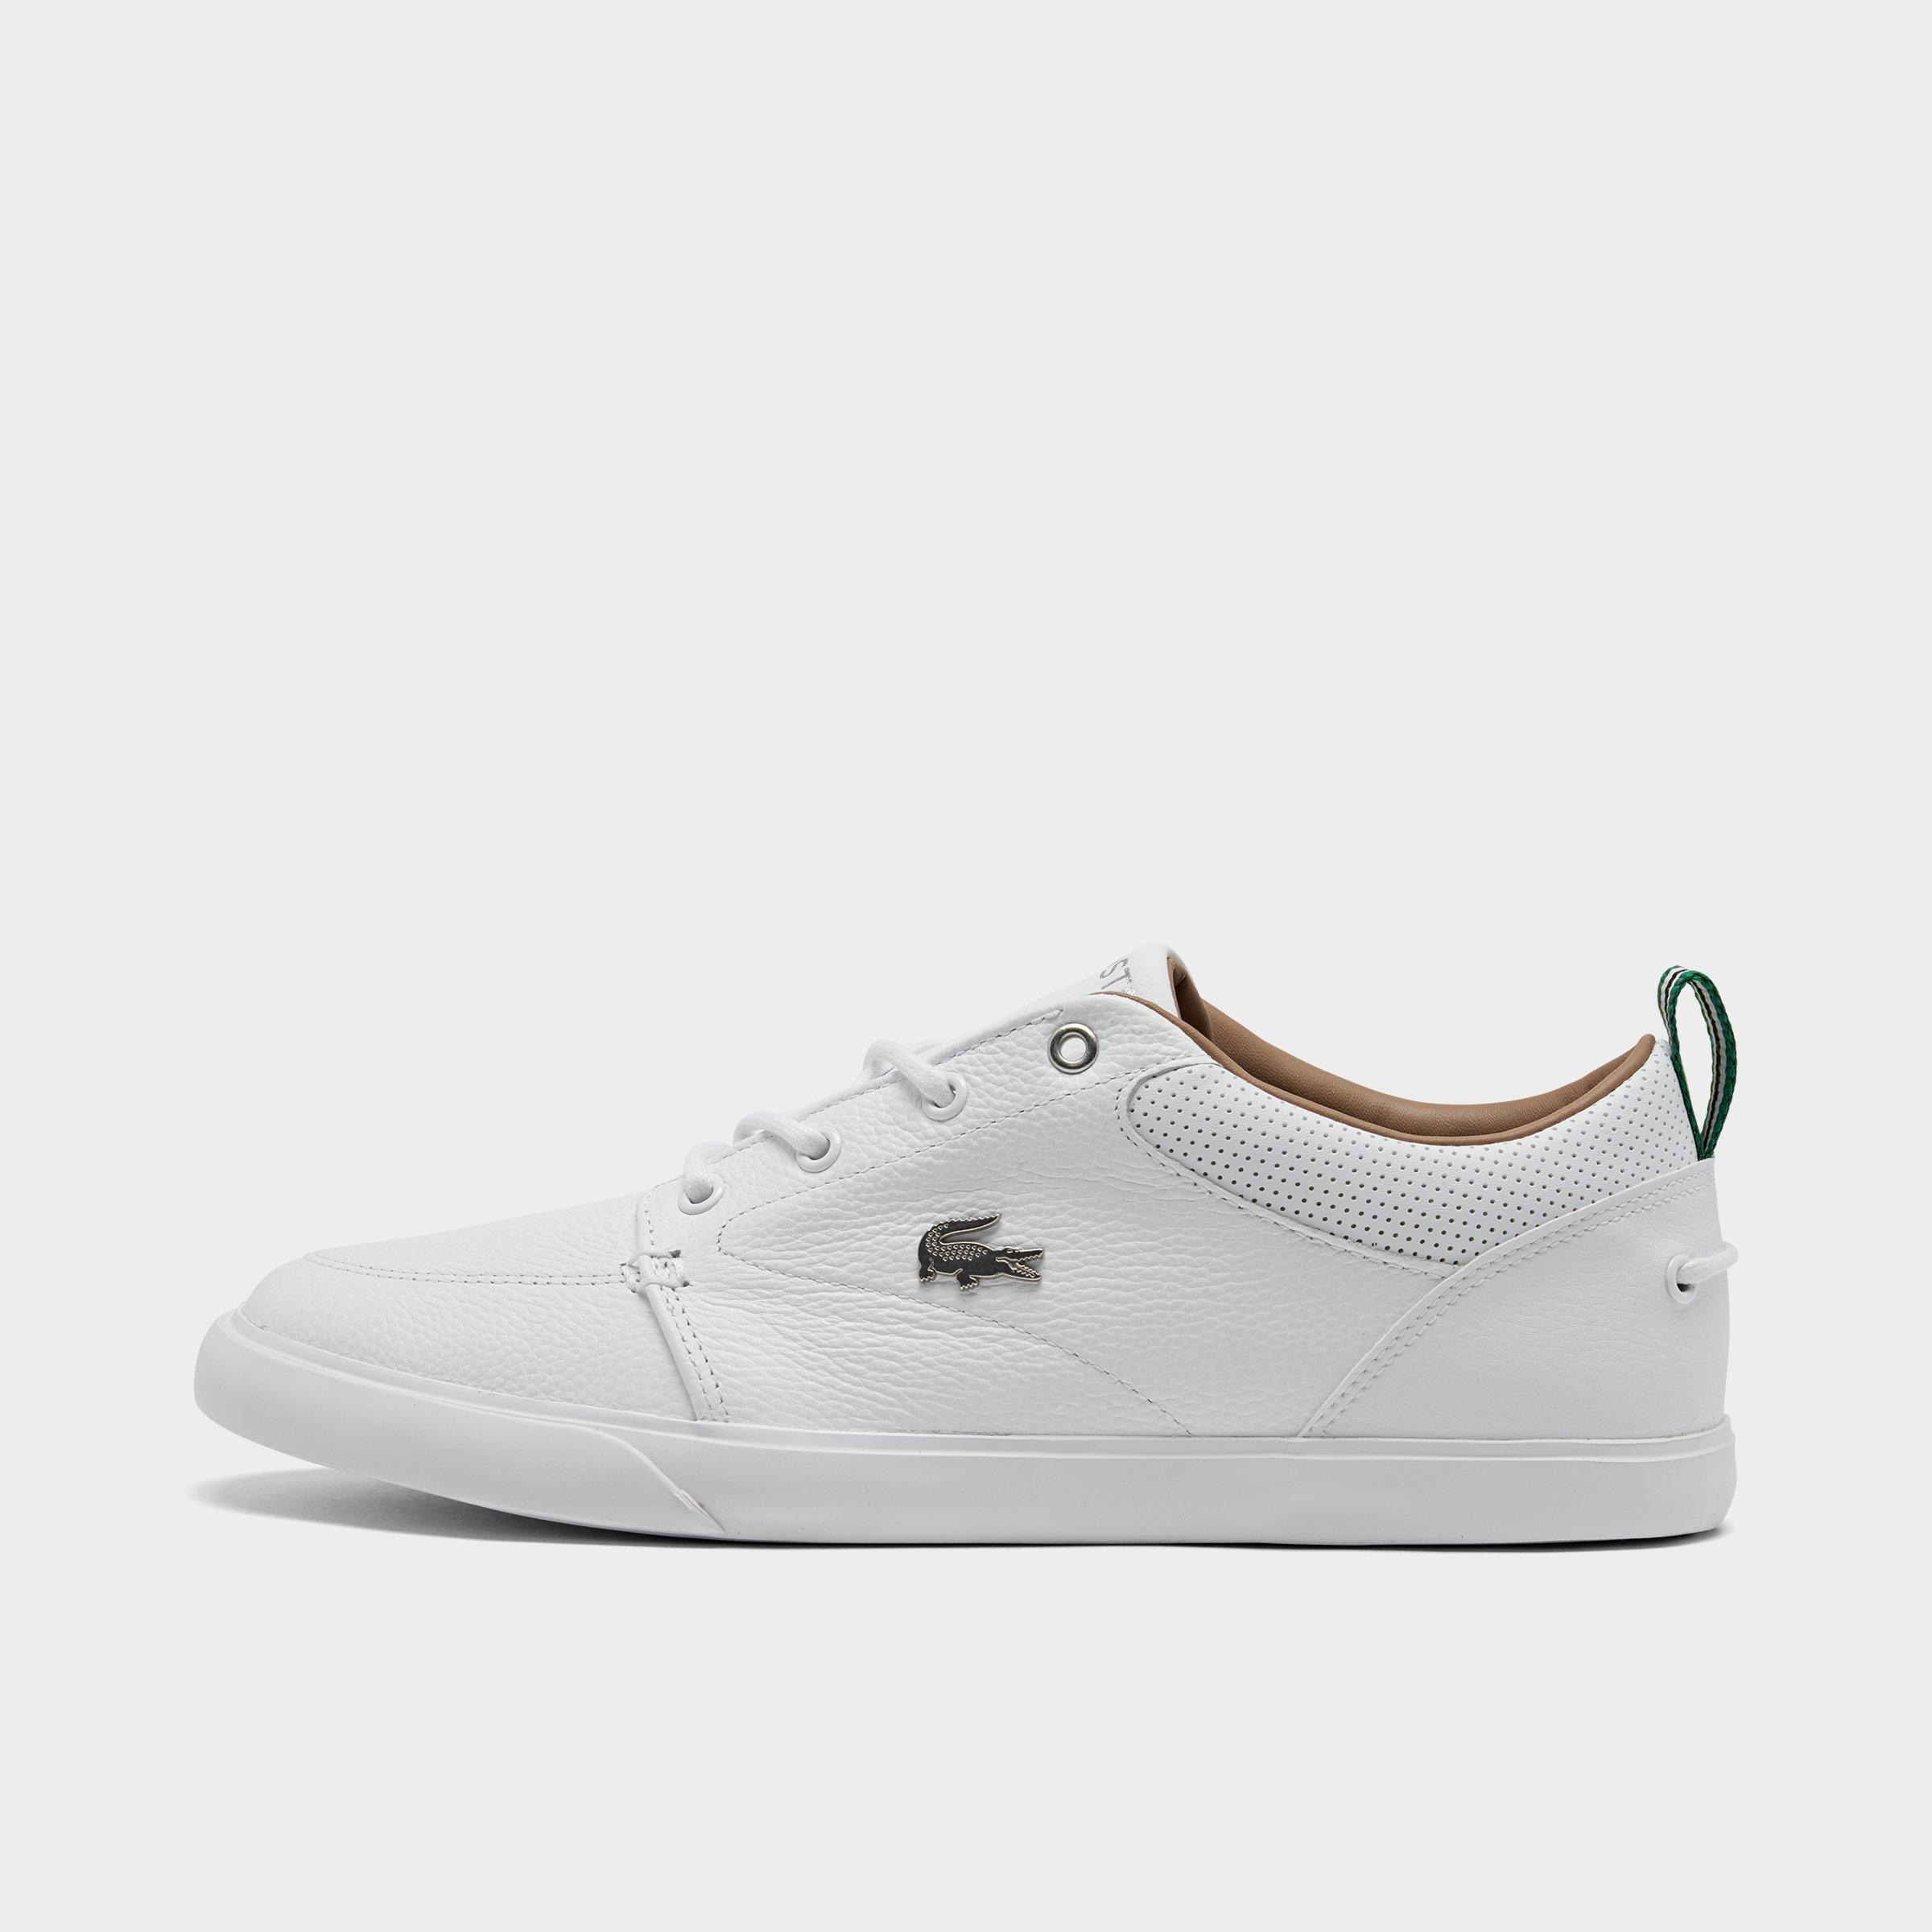 lacoste white shoes